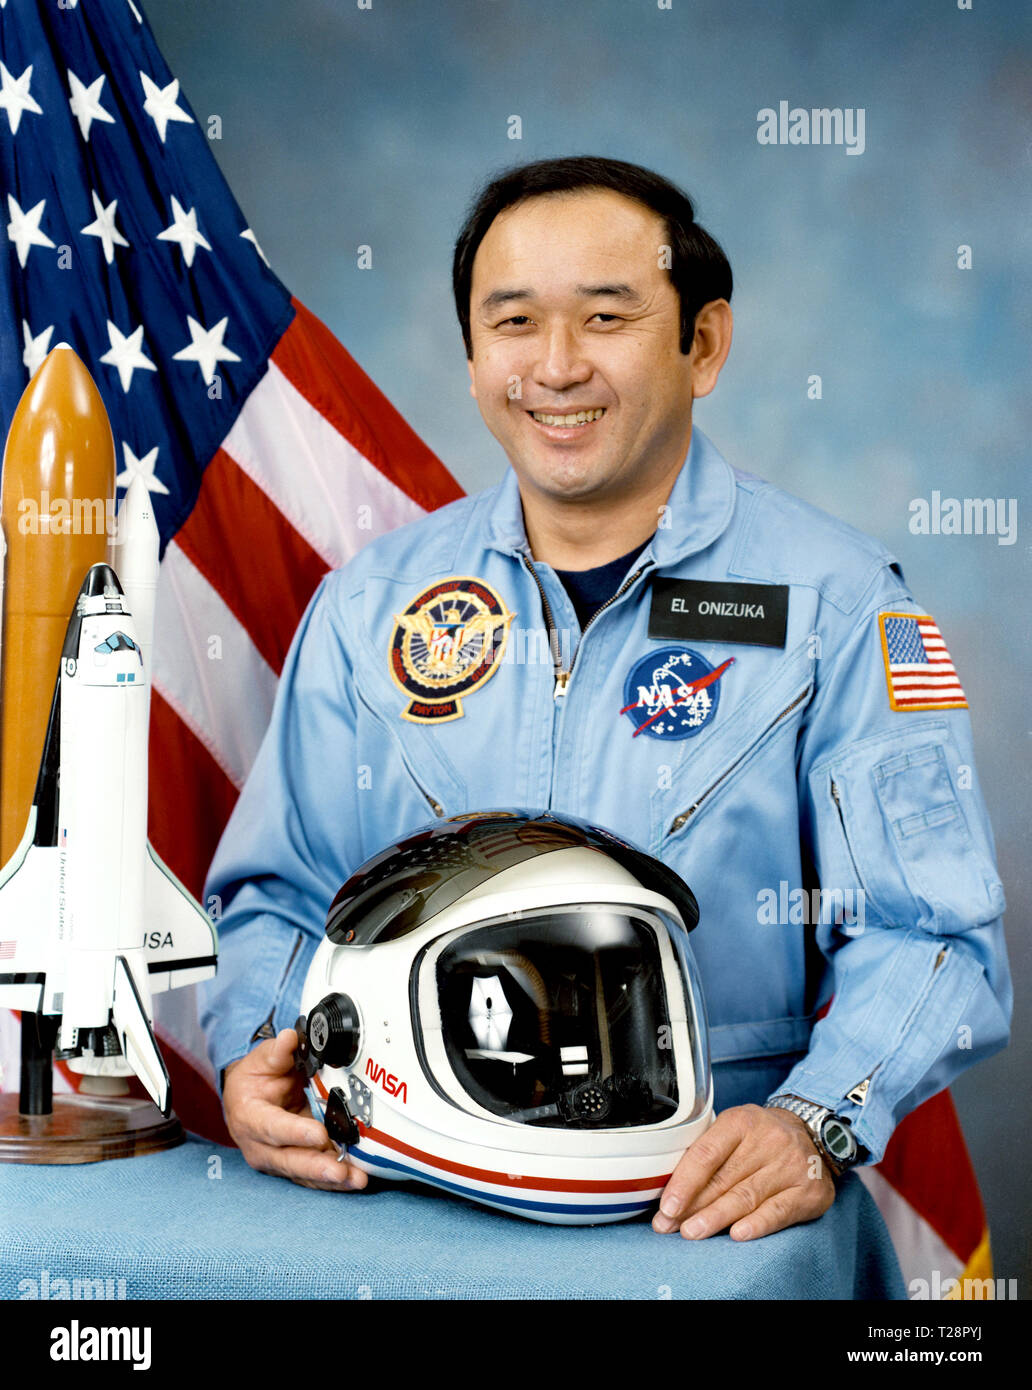 S86-25964 (31 Jan. 1978) --- Astronaut Ellison S. Onizuka. Photo credit: NASA  (NOTE: Astronaut Onizuka lost his life in the Jan. 28, 1986, STS-51L space shuttle Challenger accident, along with six other crew members.) Stock Photo